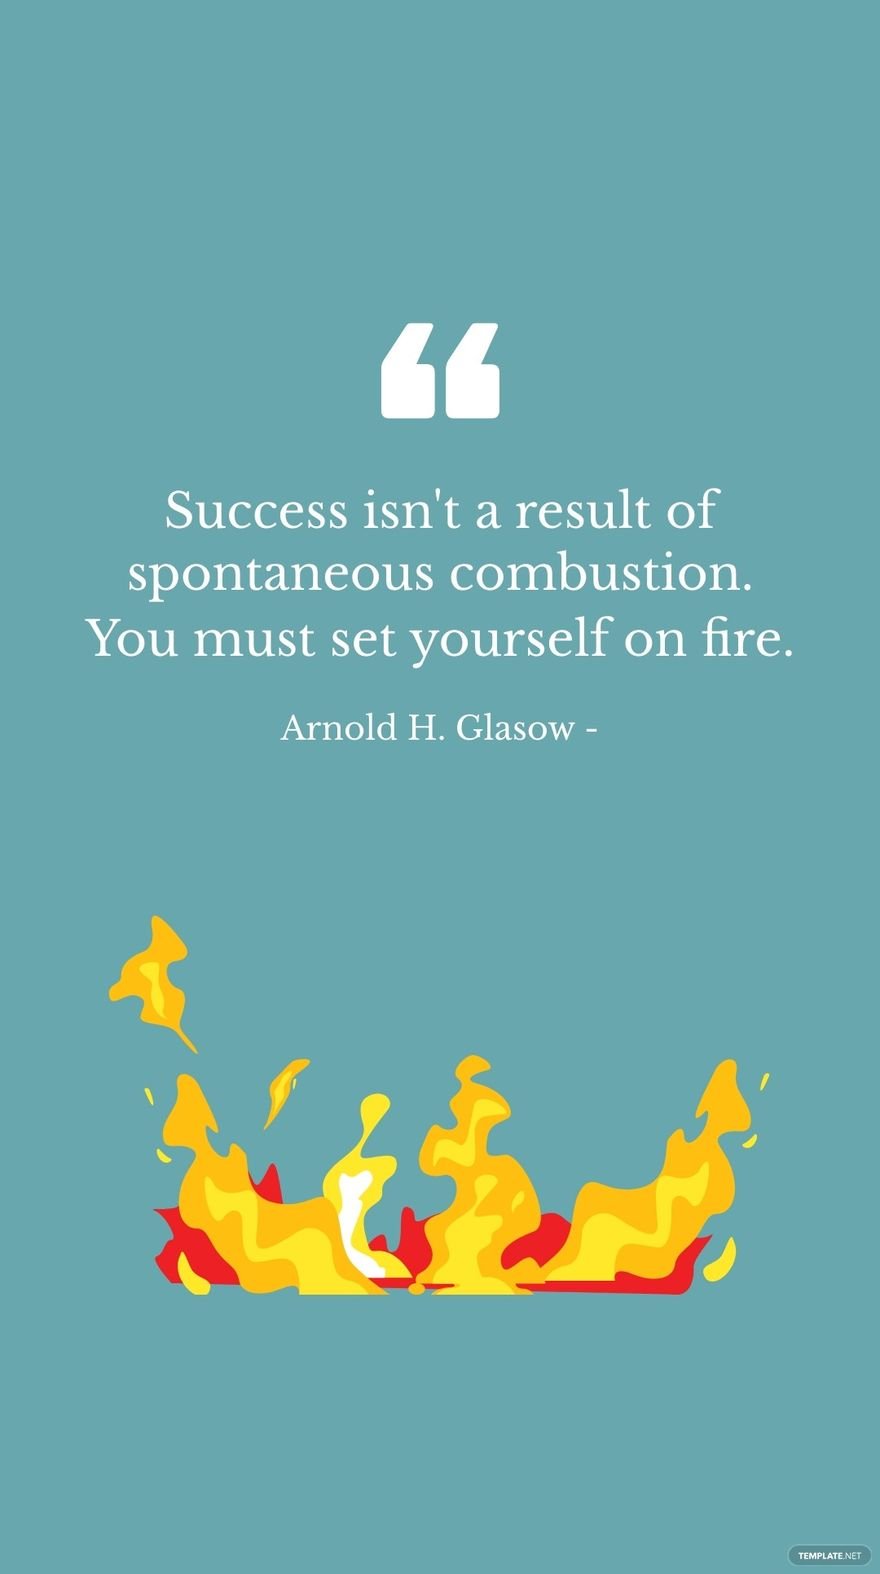 Arnold H. Glasow - Success isn't a result of spontaneous combustion. You must set yourself on fire.